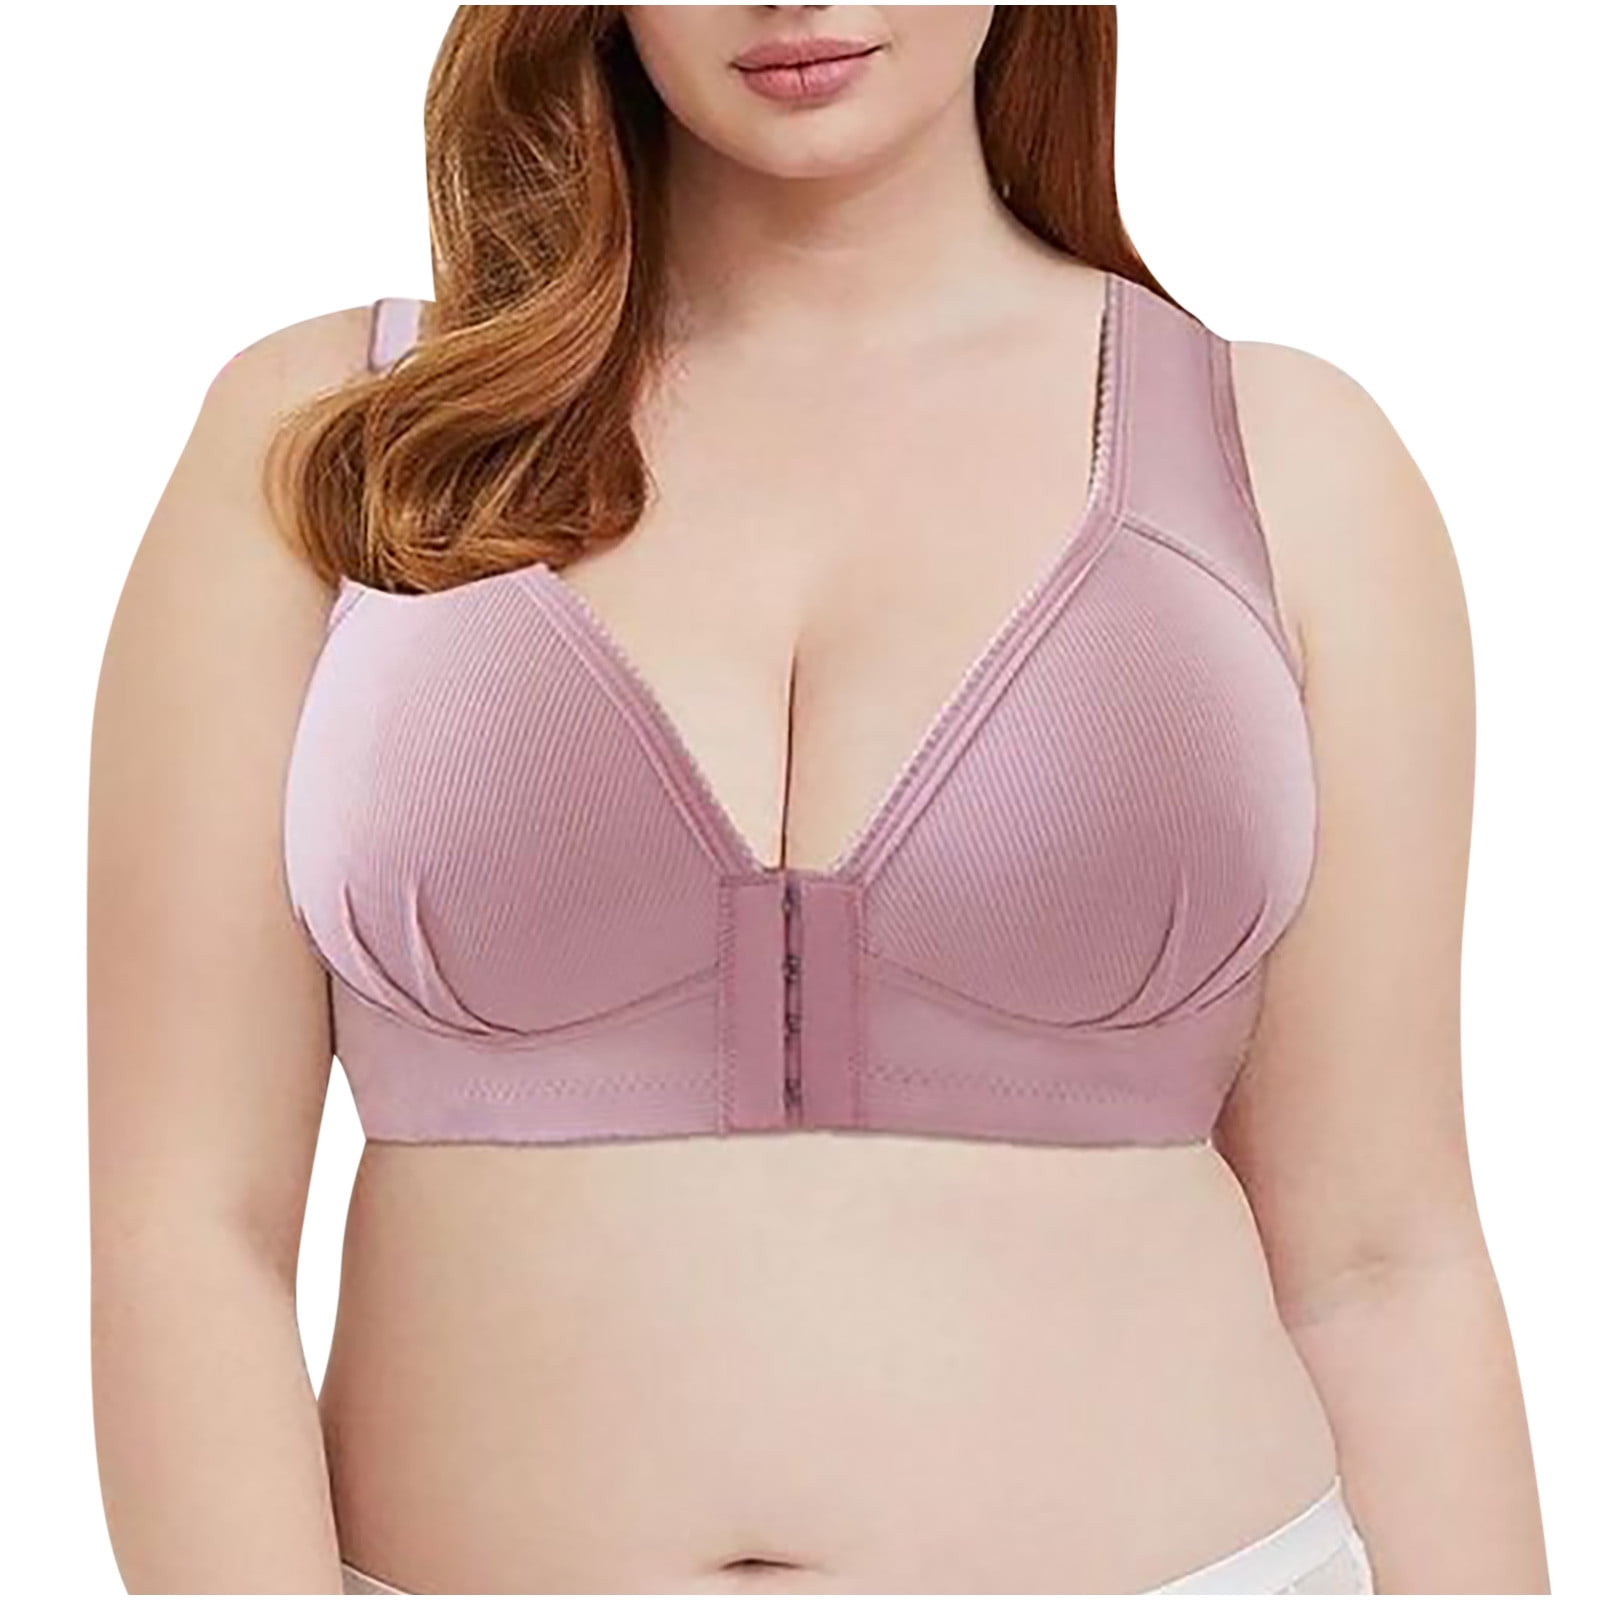 Plus Size Front Closure Elastic Push Up Comfort Bra,Women's Wirefree Lace Bra,Everyday Bras for Women